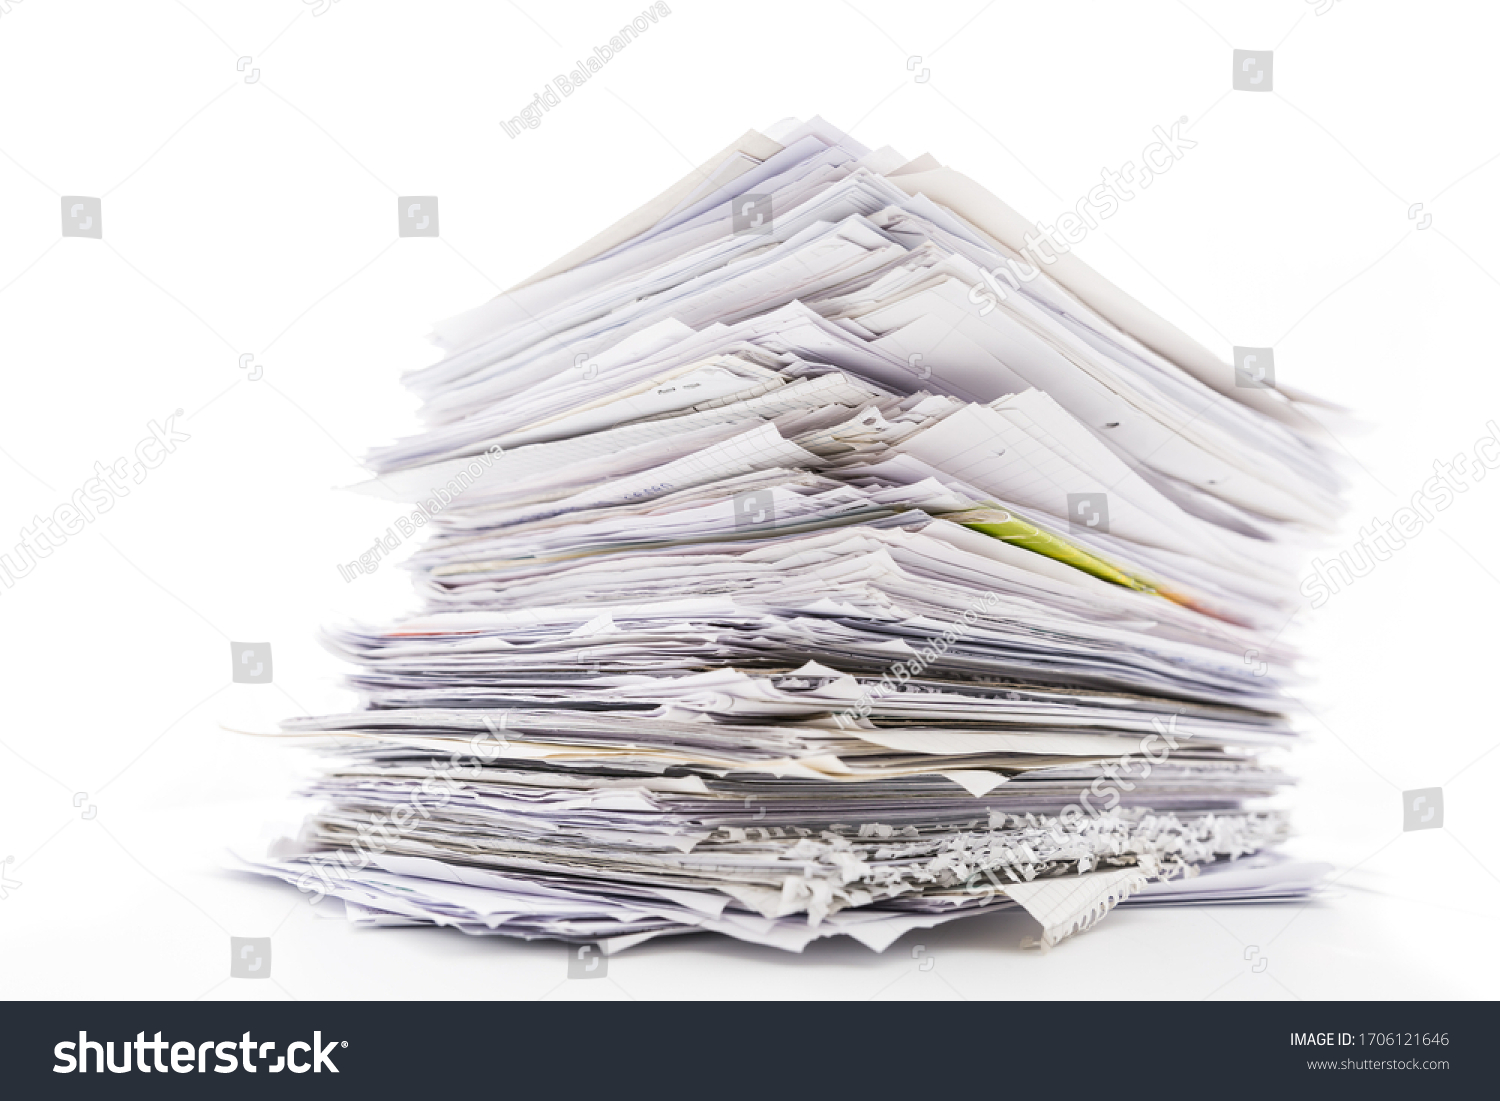 Large pile of waste paper isolated on white. Ready for recycling #1706121646